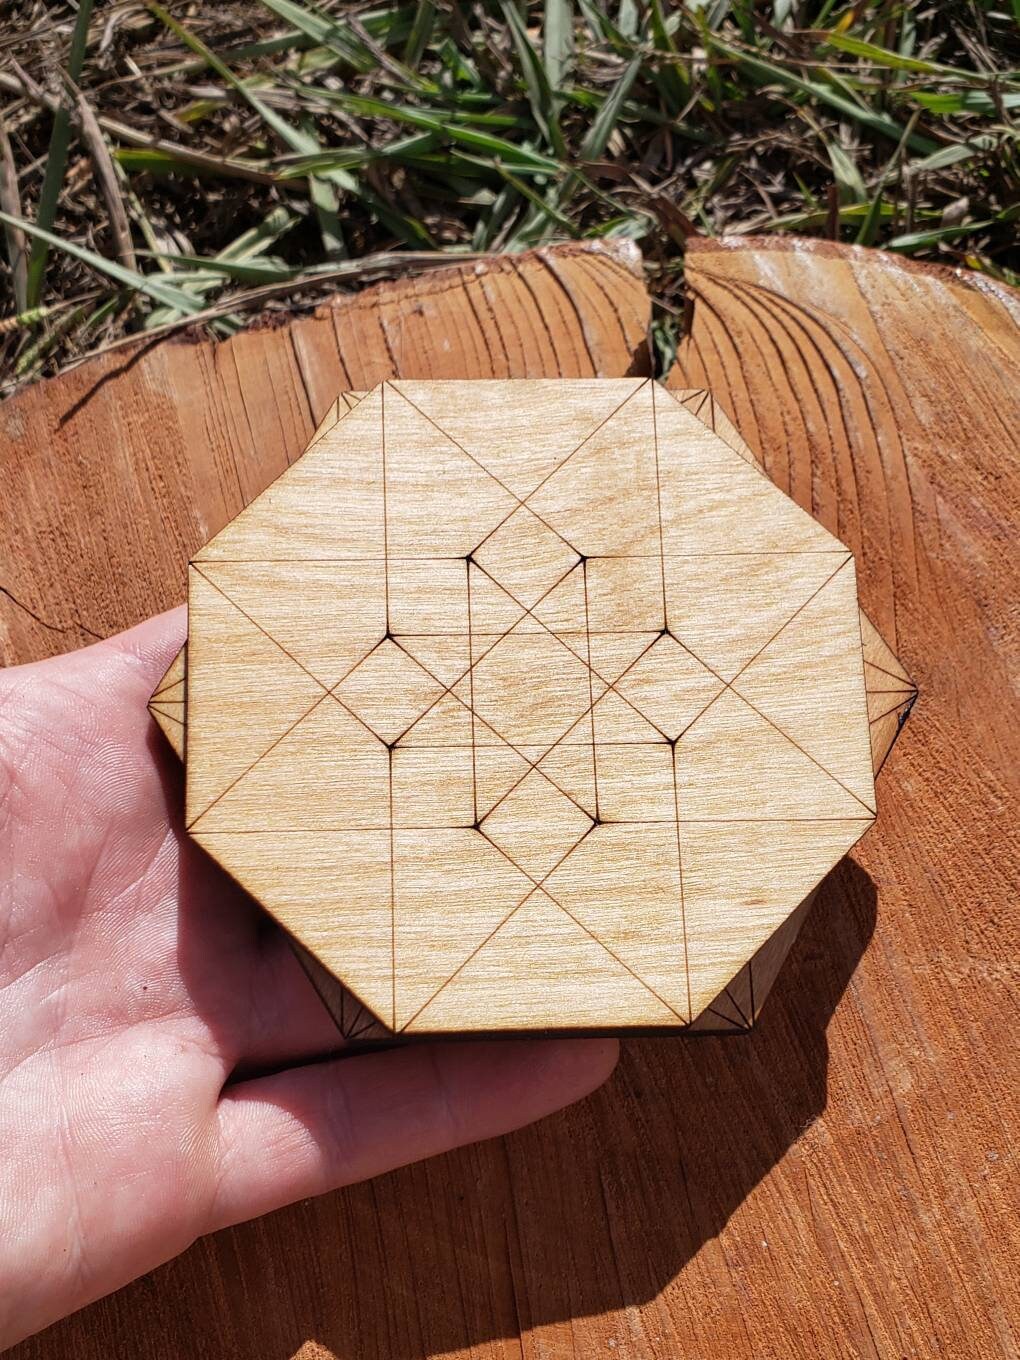 ONE Sacred Geometry Coaster or Mini Crystal Grid - Hypercube Tesseract or Vector Equilibrium  - LaserEngraved from Sustainably Grown Wood